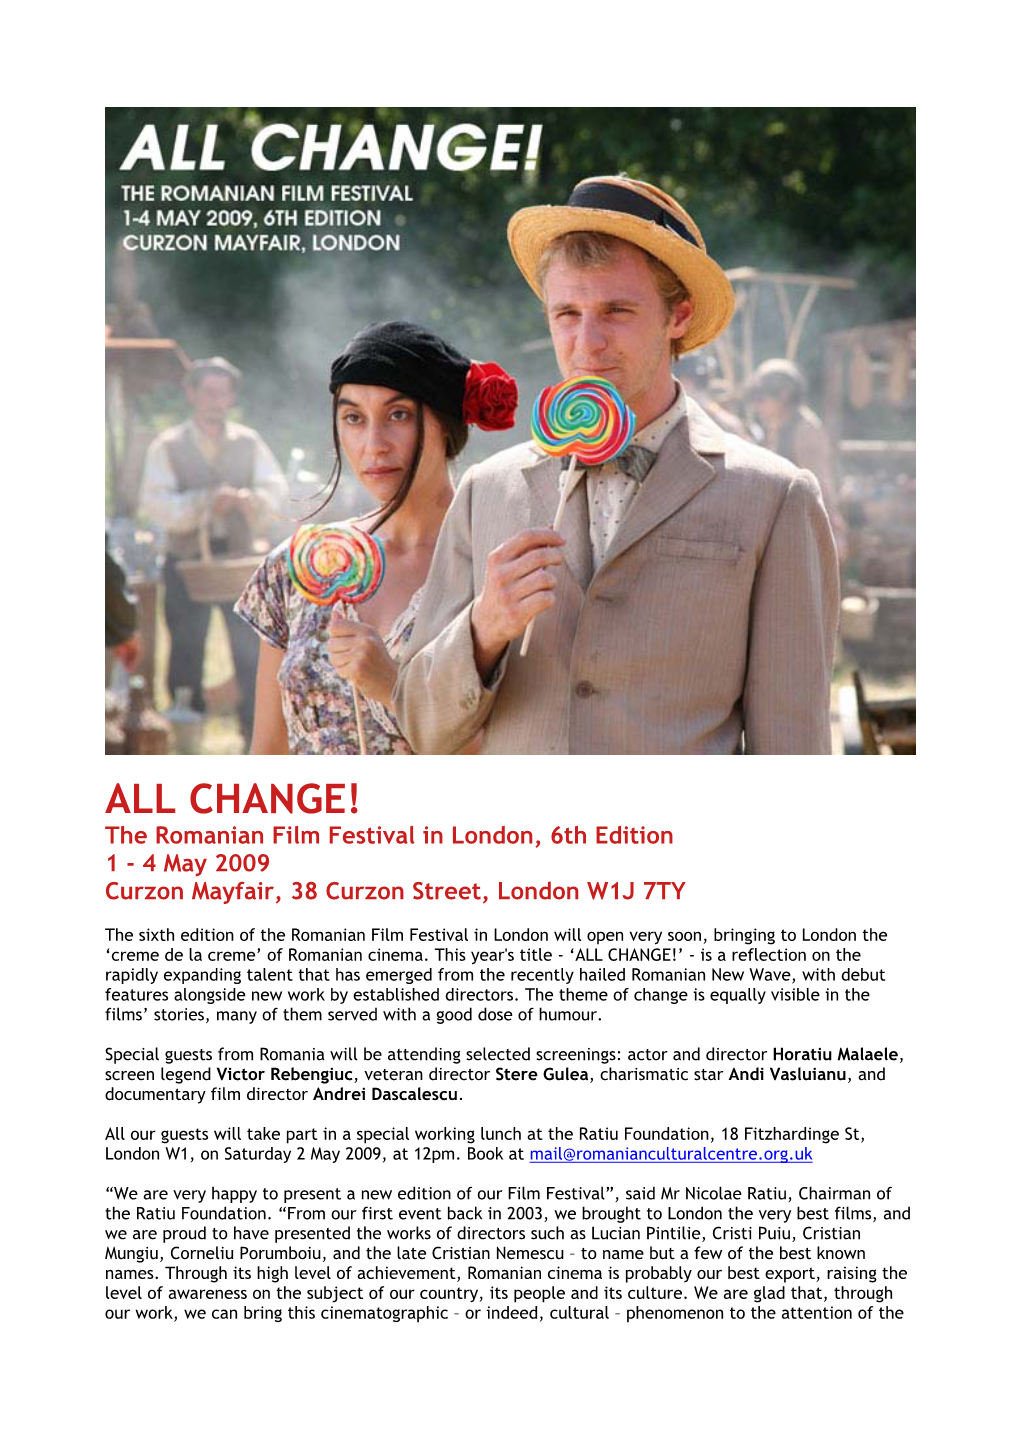 ALL CHANGE! the Romanian Film Festival in London, 6Th Edition 1 - 4 May 2009 Curzon Mayfair, 38 Curzon Street, London W1J 7TY